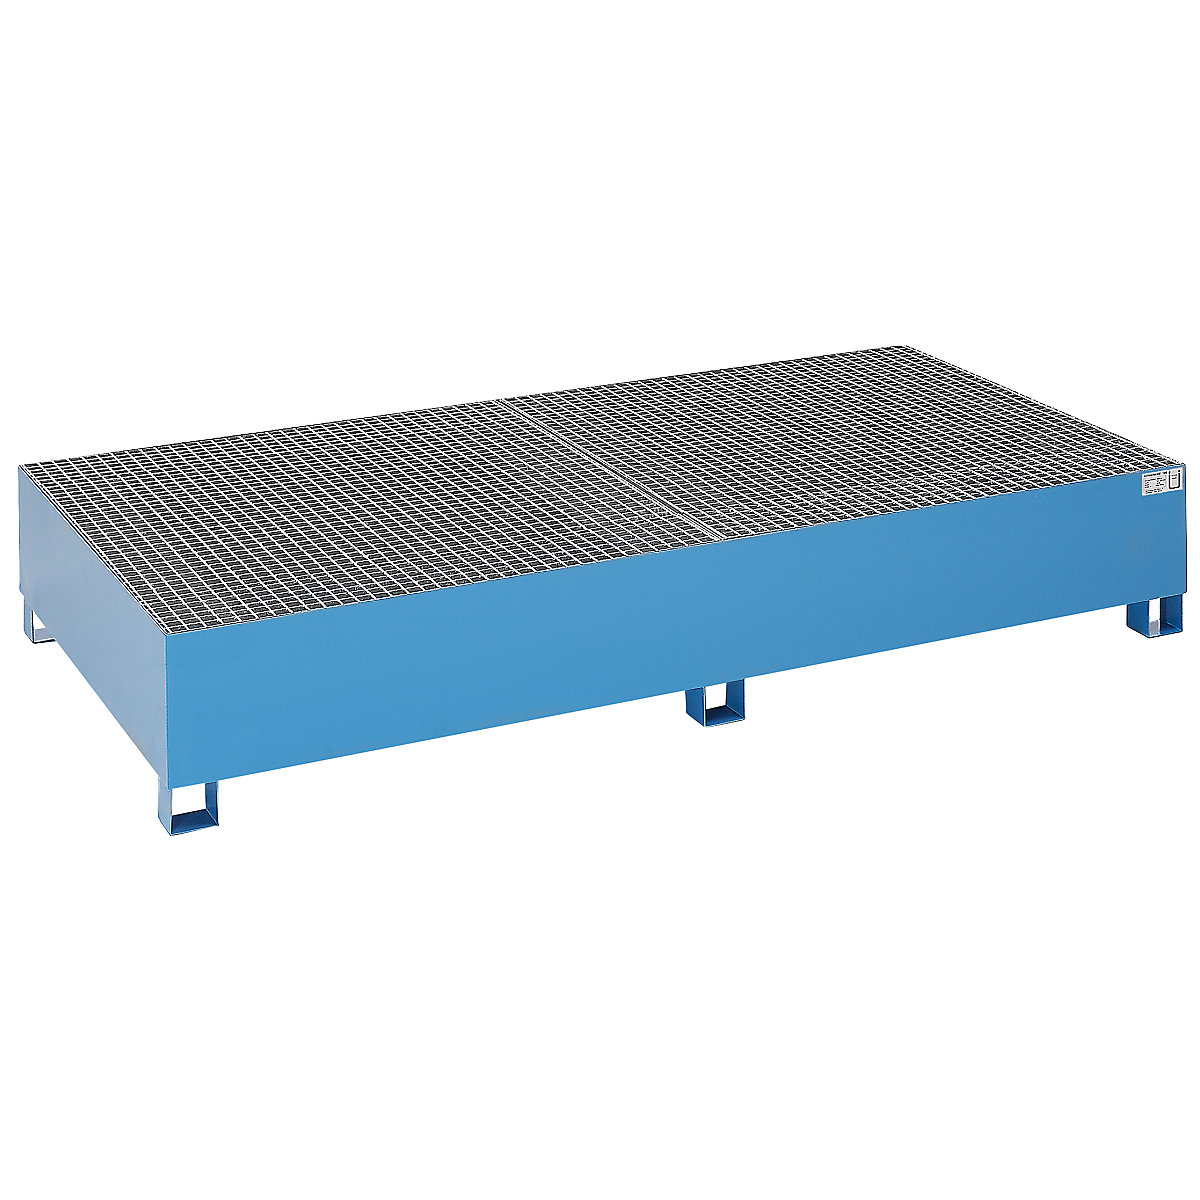 Steel sump tray for IBC/CTC tank containers - eurokraft basic